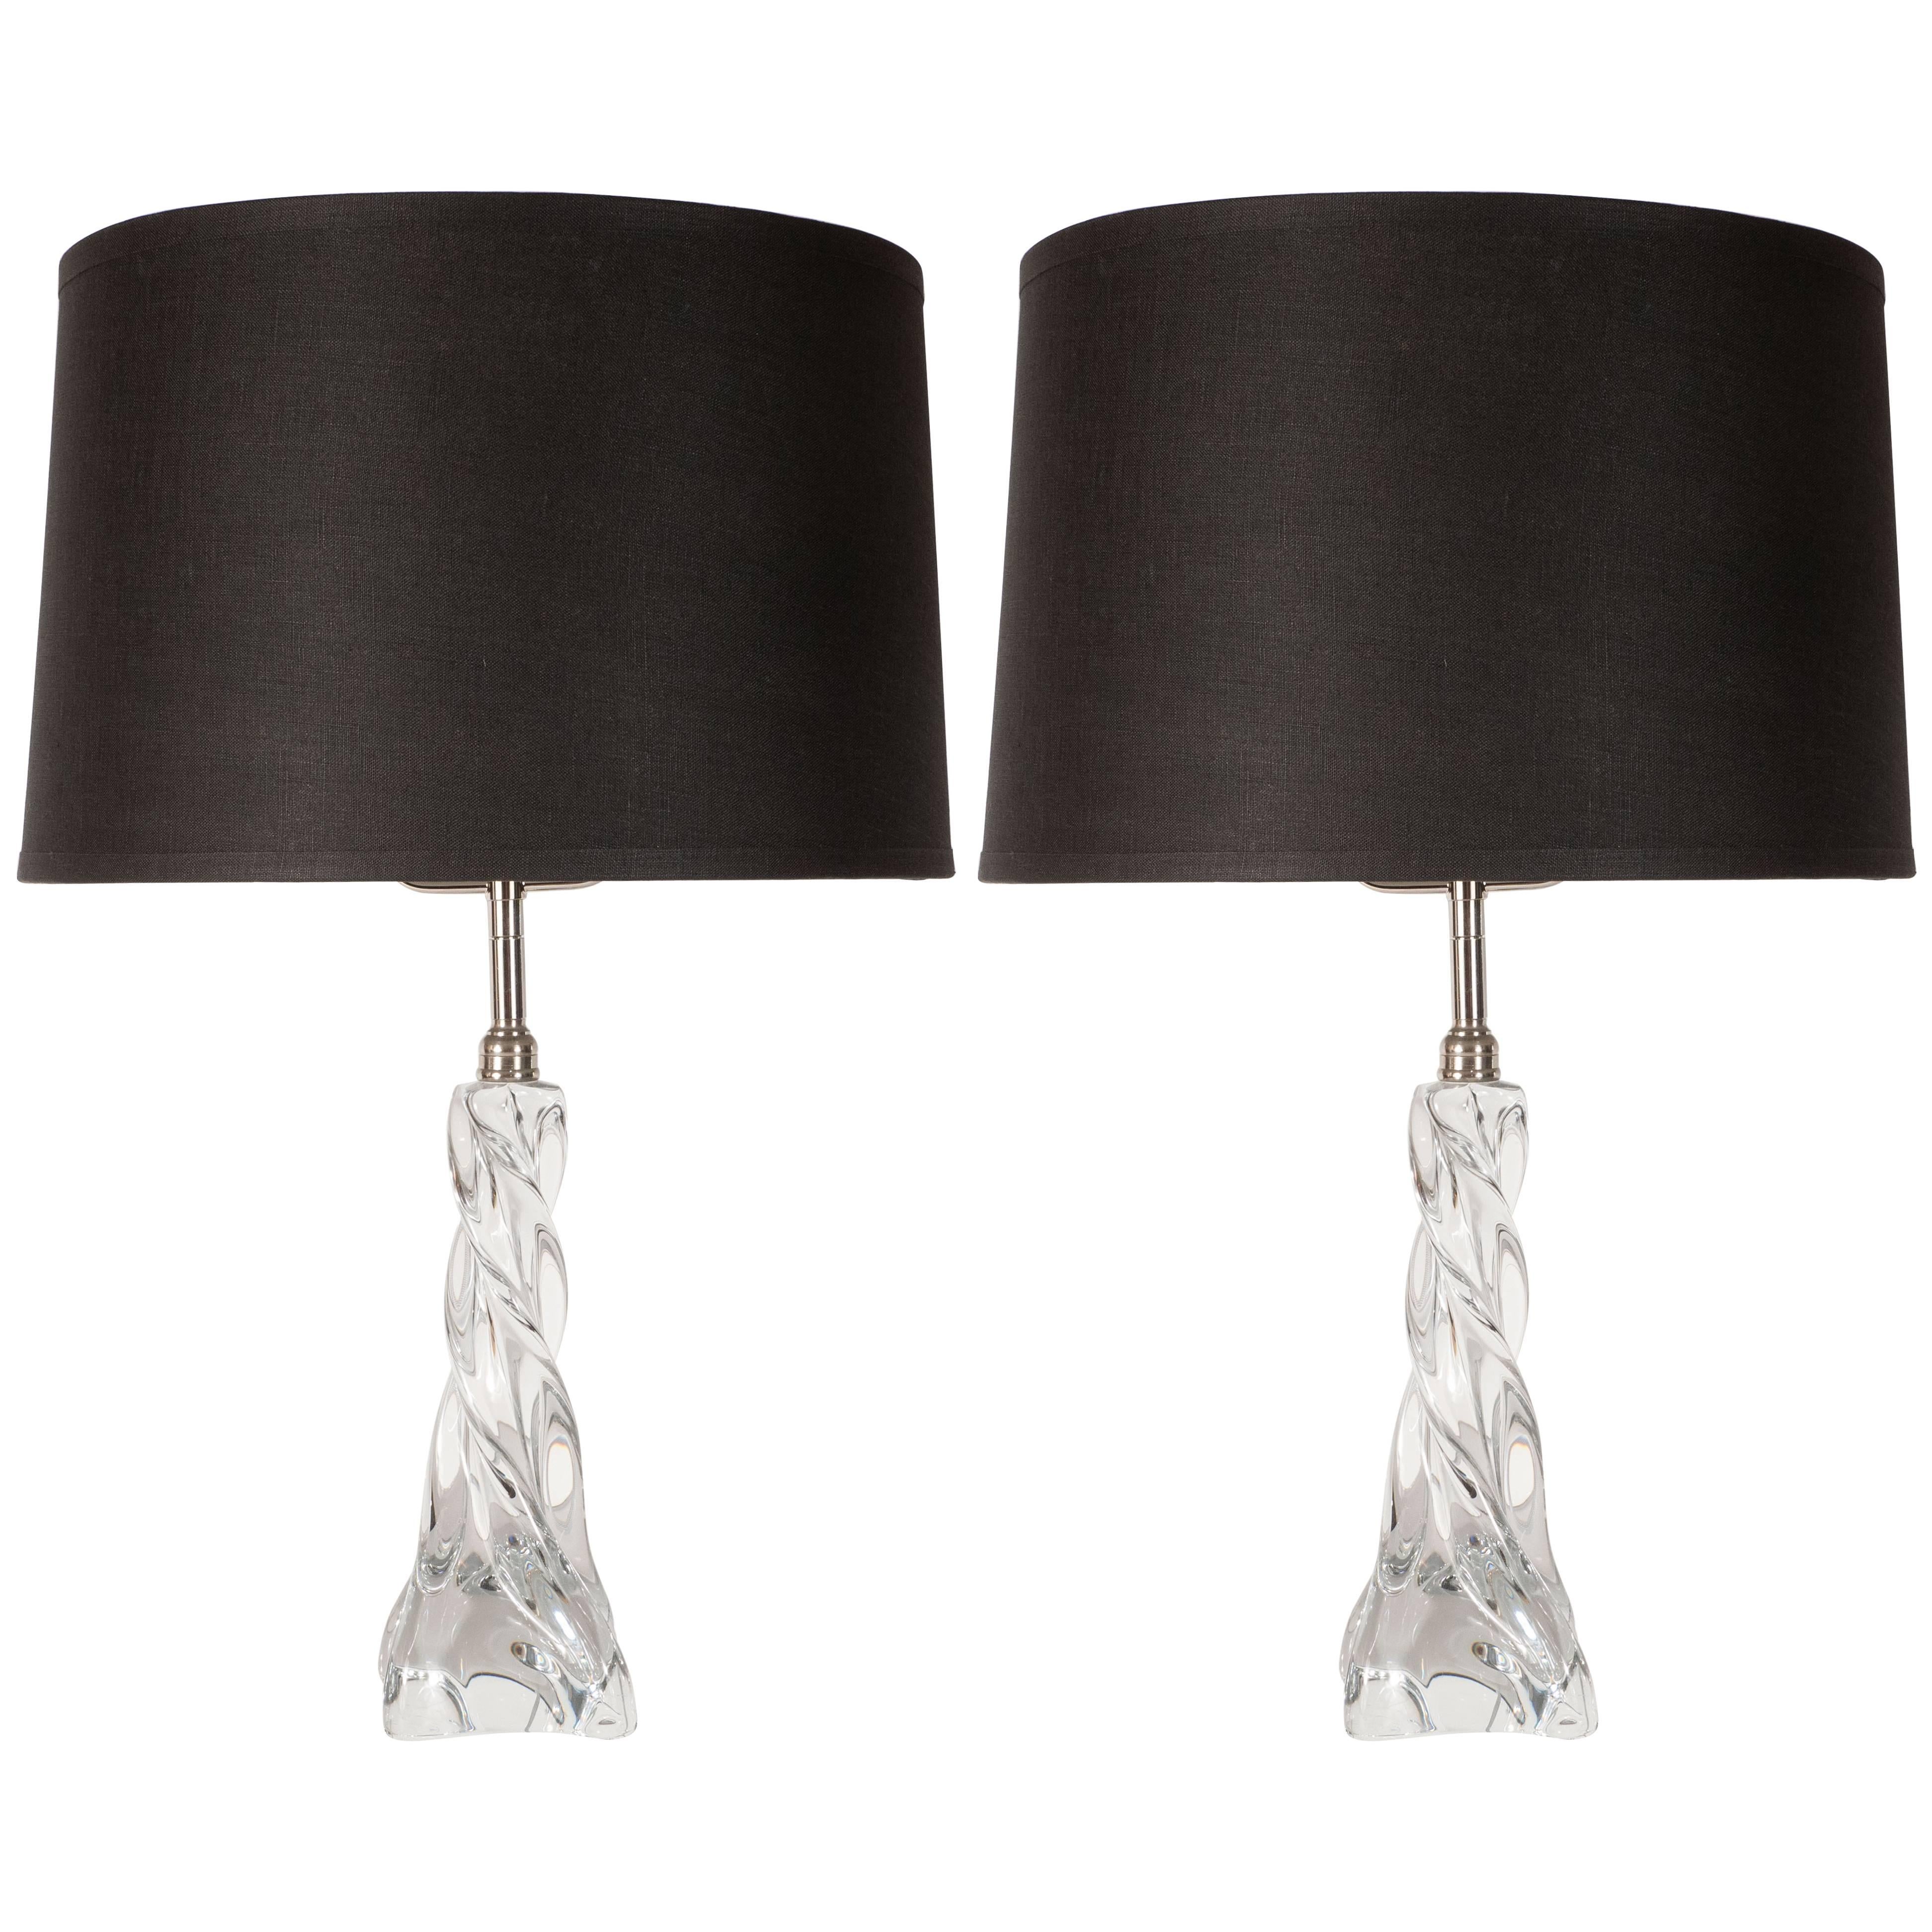 Mid-Century Modern Braided Translucent Glass and Chrome Table Lamps by Baccarat